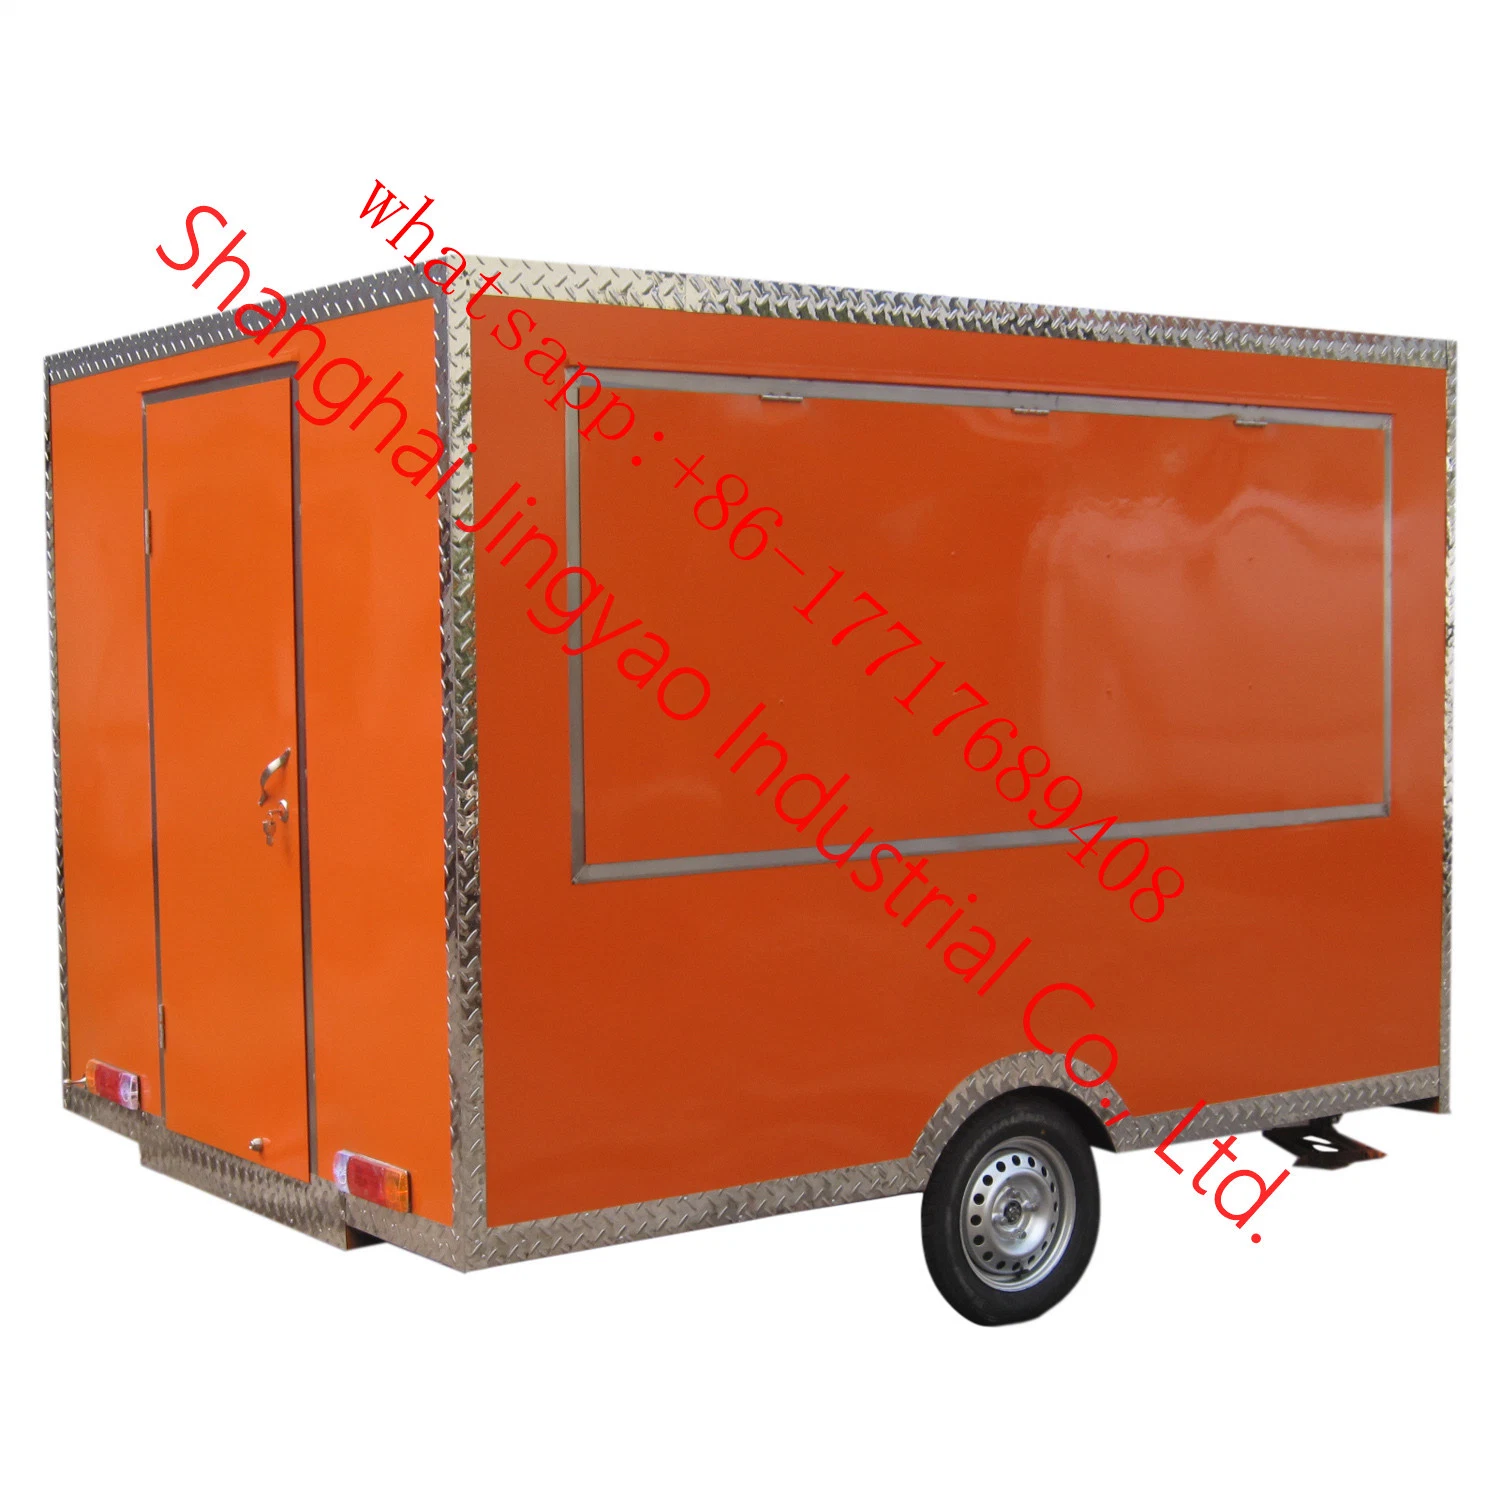 New Concession Stand Trailer Mobile Kitchen Food Trailer Mobile Operated Cart Processional Manufacturer Food Cart New Design Food Kiosk Cart